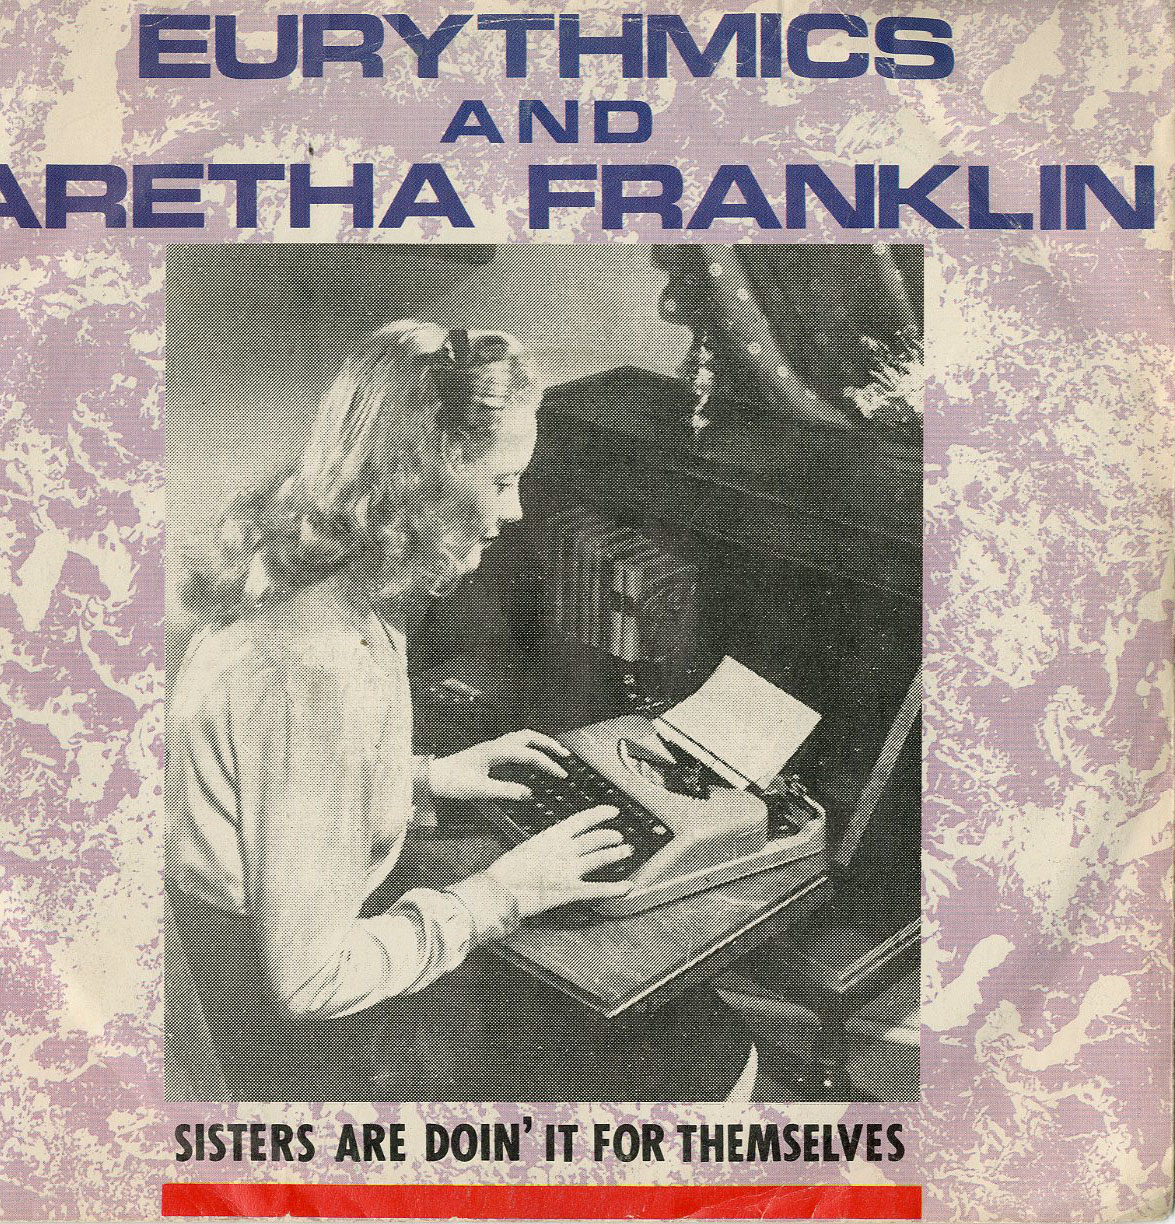 Albumcover Eurythmics - Sisters Are Doin It For Themselves ( mit Aretha Franklin) / If You Like A Ball and Chain